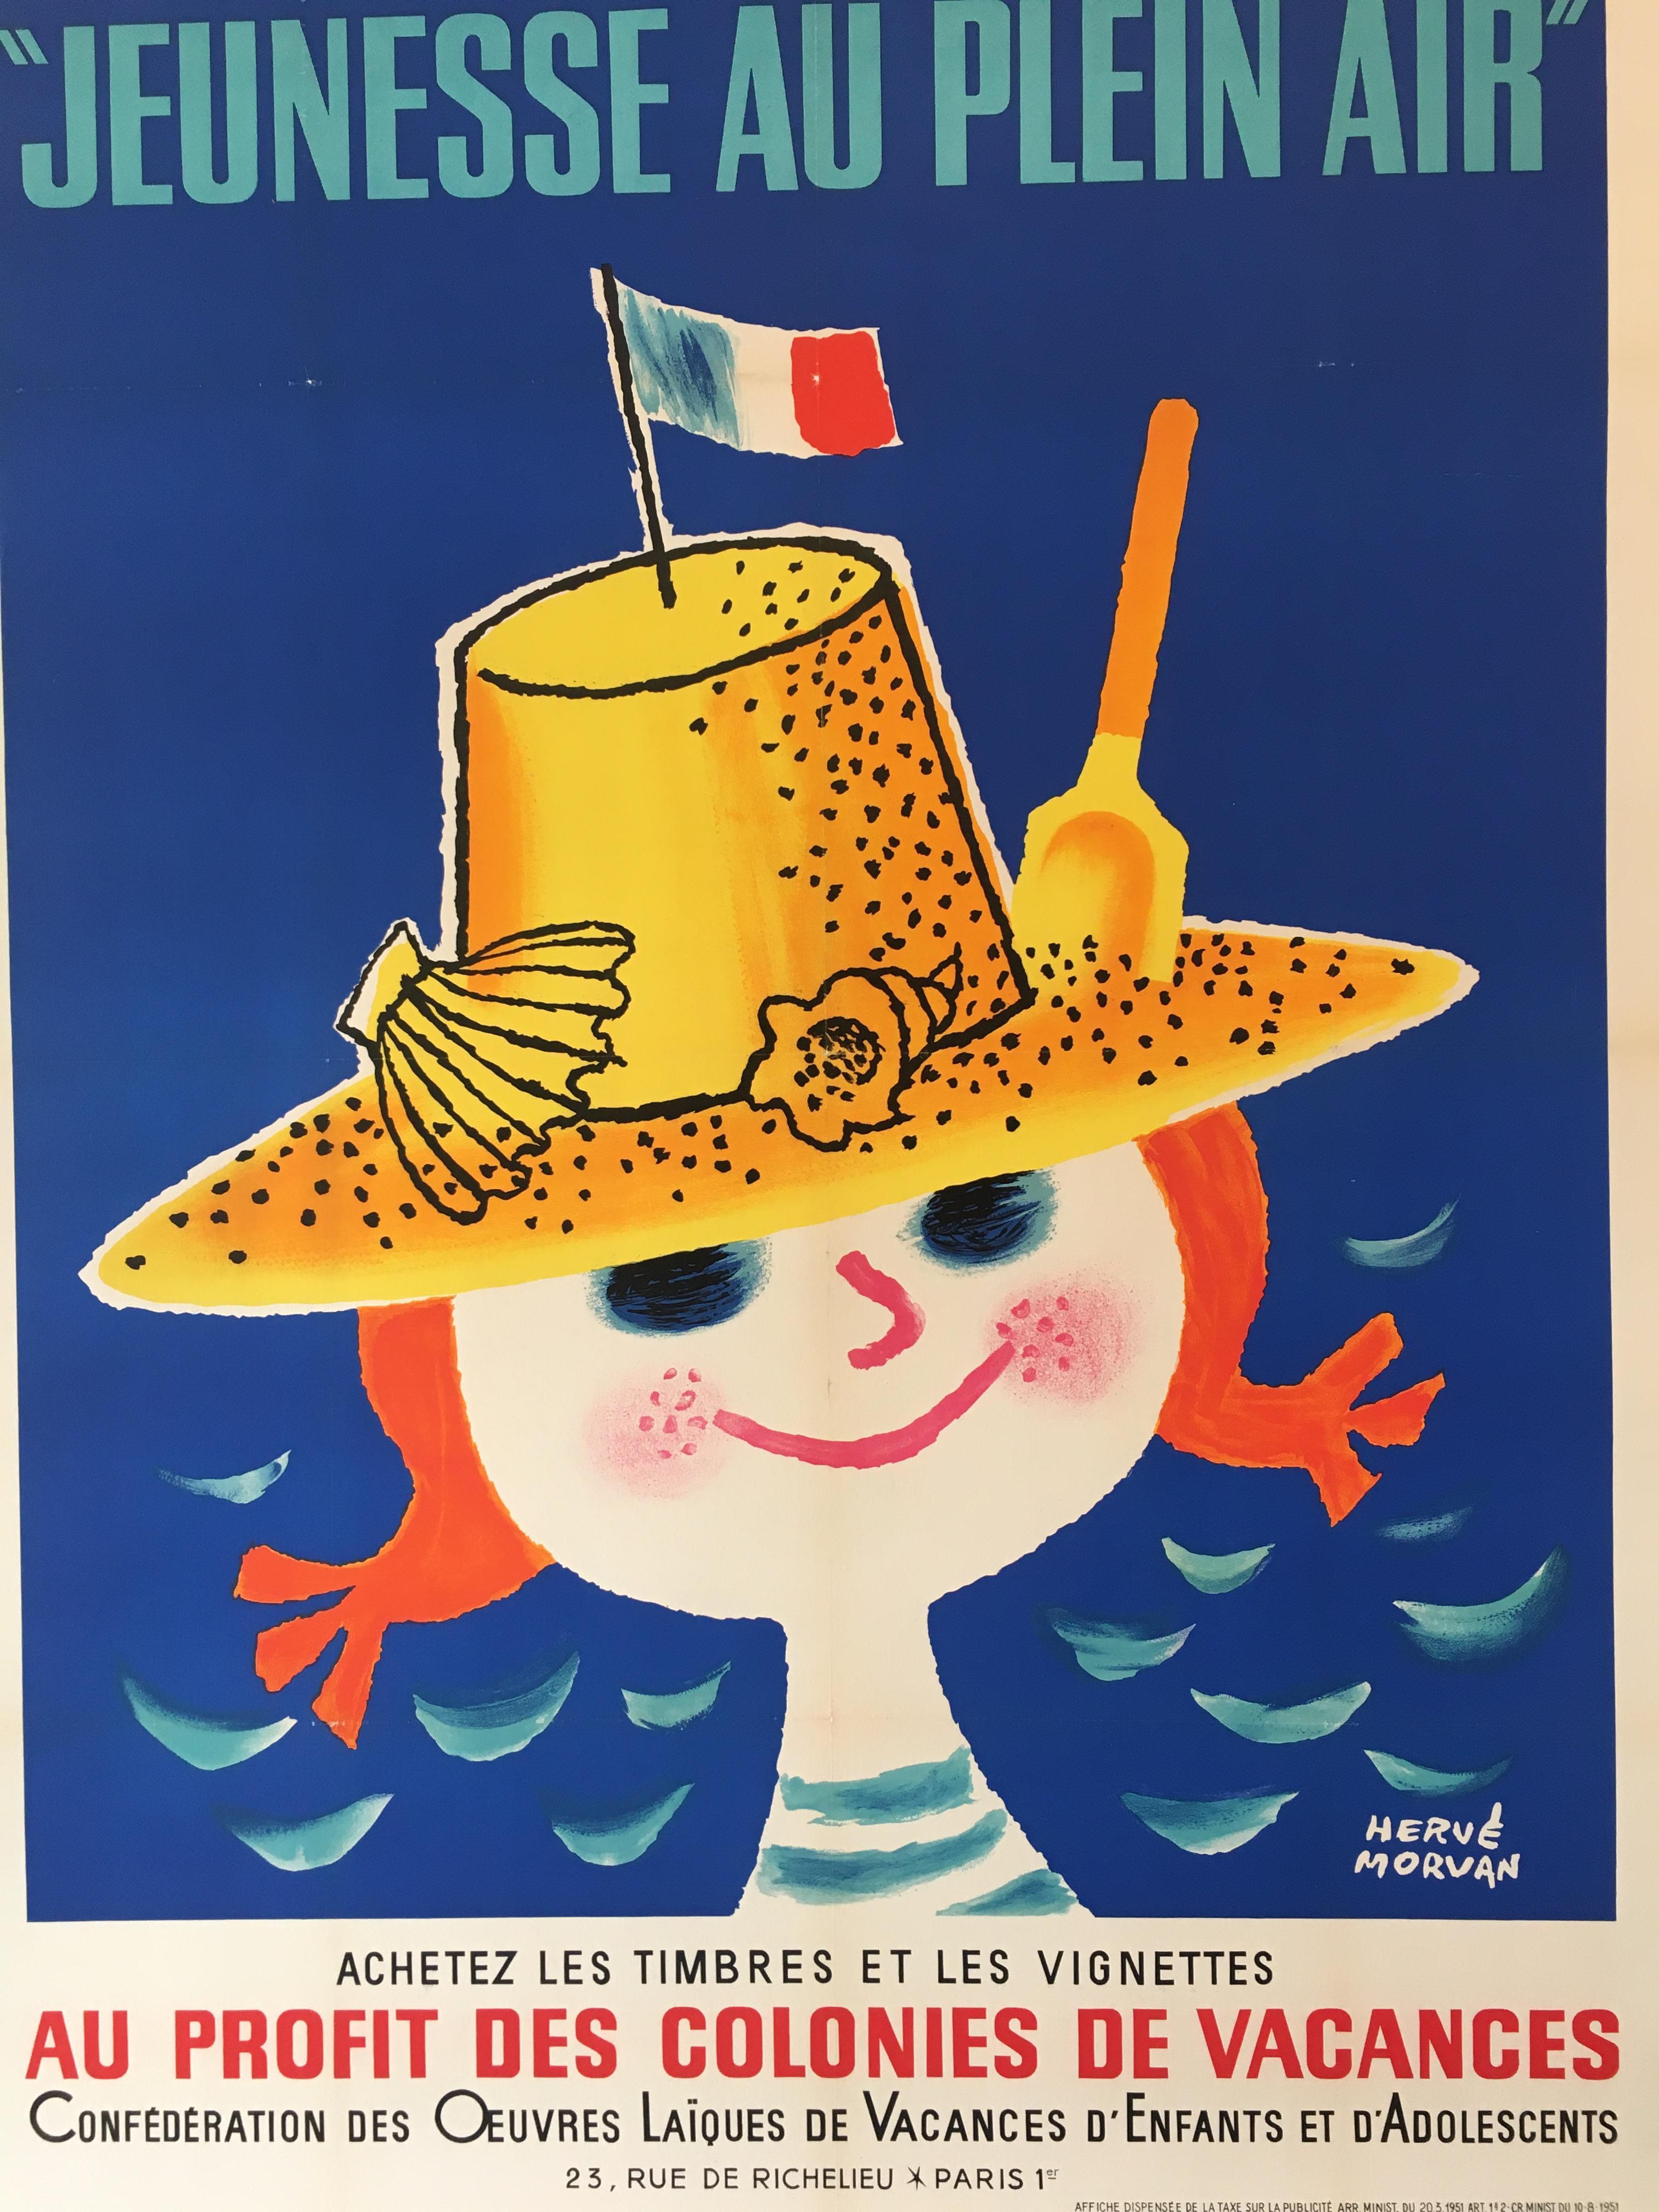 Mid-Century Original French Vintage Poster, 'Jeunesse Au Plein Air' by H. Morvan In Excellent Condition In Melbourne, Victoria